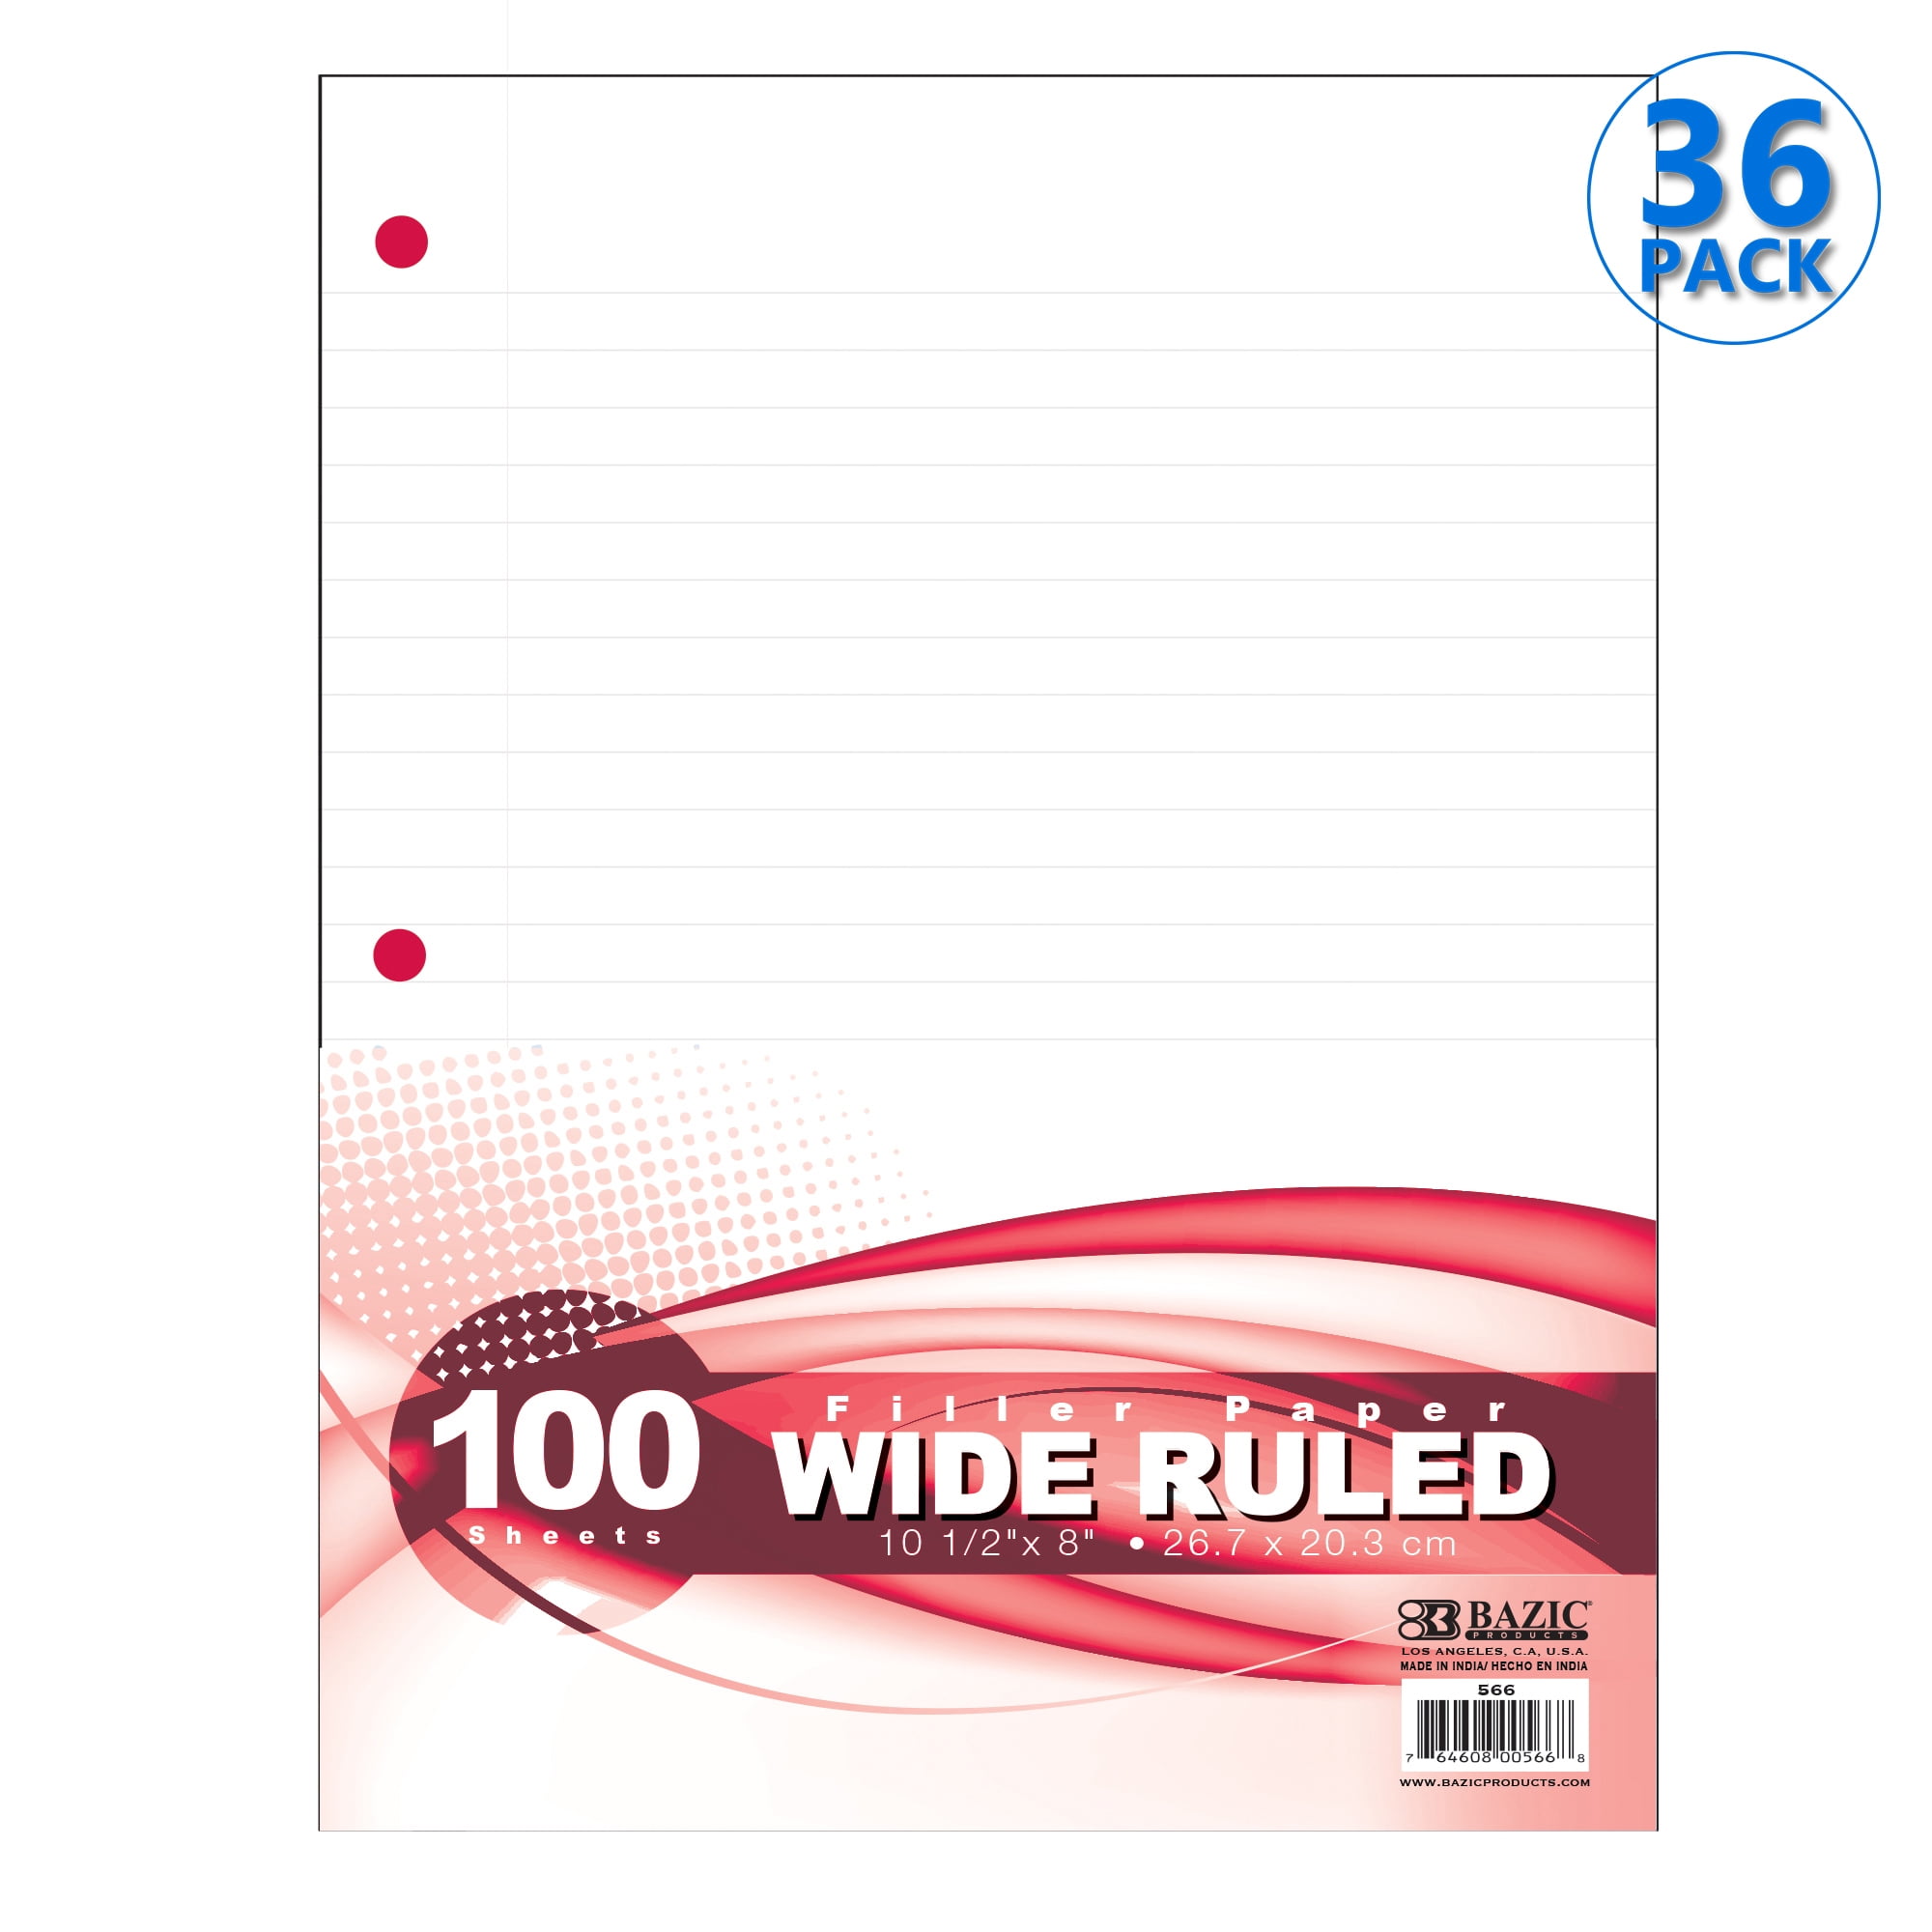 Mead Loose Leaf Paper Writing & Office Paper Wide Ruled 200 Sheets K-12 or Homeschool 10-1/2 x 8 3 Hole Punched for 3 Ring Binder ! 0 1 Pack 3 Count Perfect for College Lined Filler Paper 